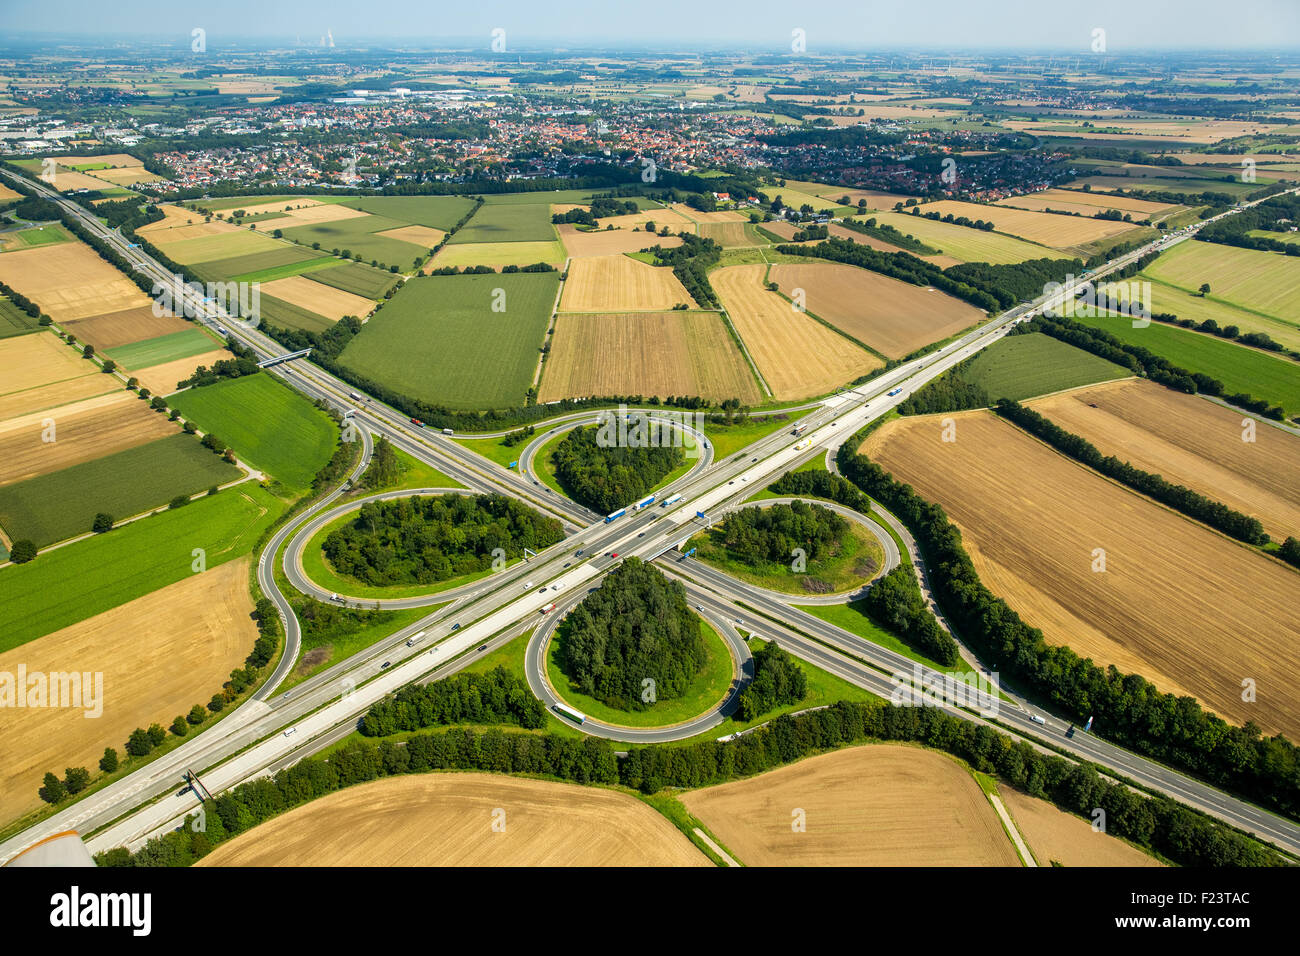 Motorway intersection, A44 and A445, cloverleaf junction, at Werl, North Rhine-Westphalia, Germany Stock Photo